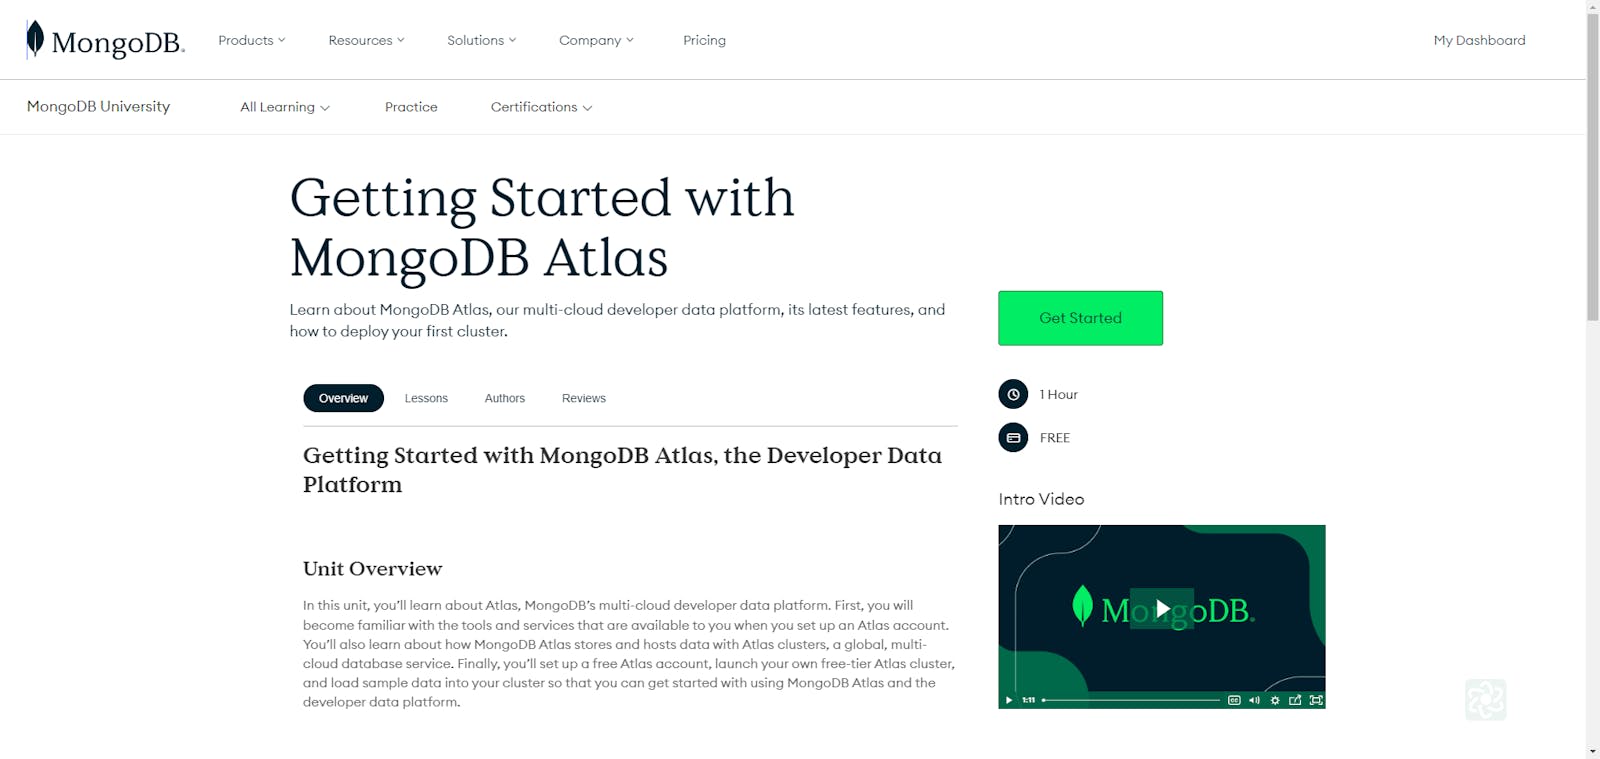 Getting Started with MongoDB Atlas